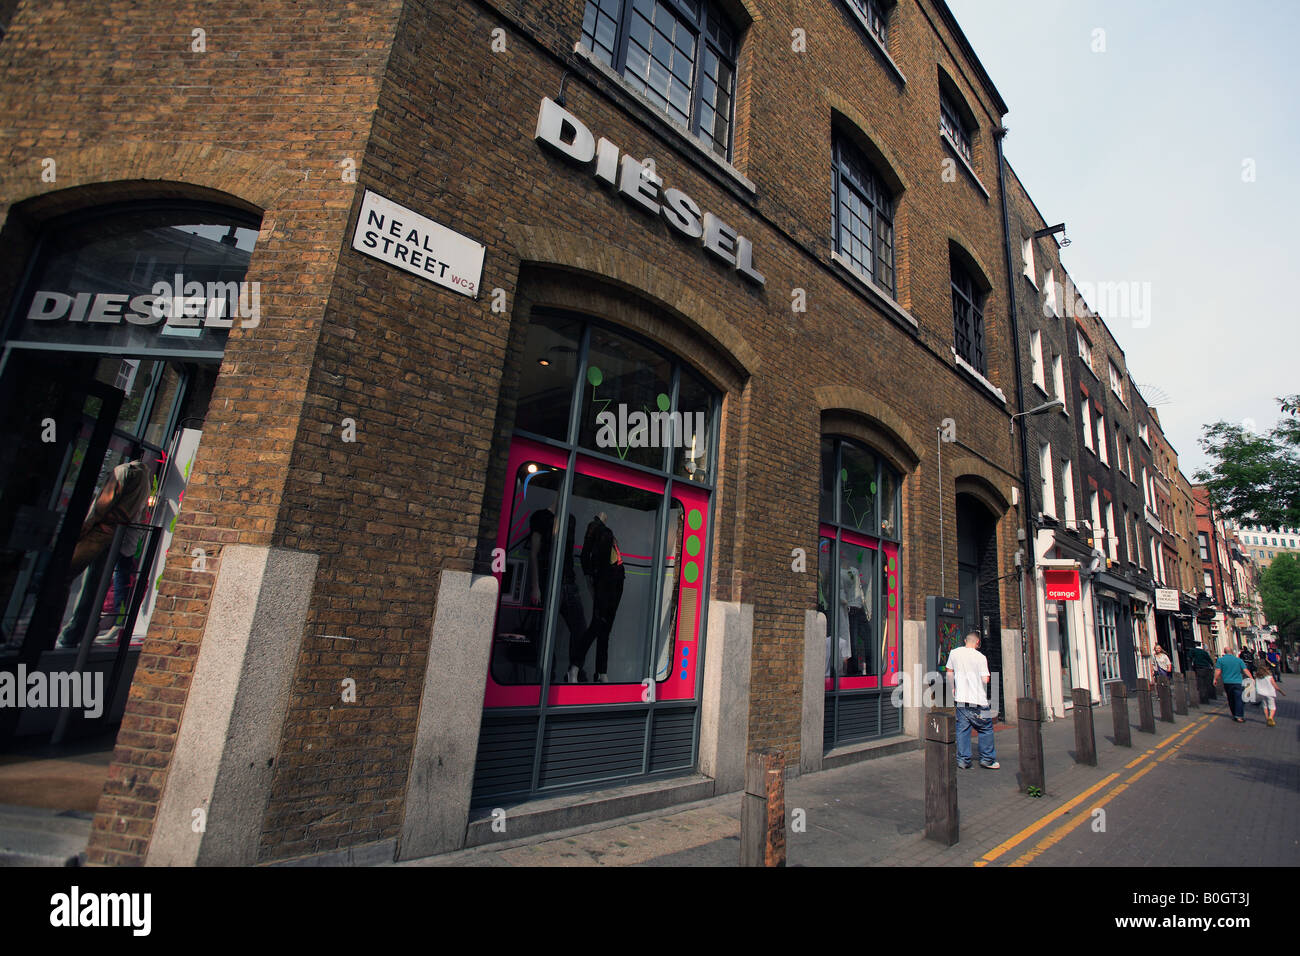 united kingdom west london covent garden wc2 neal street diesel clothing shop Stock Photo